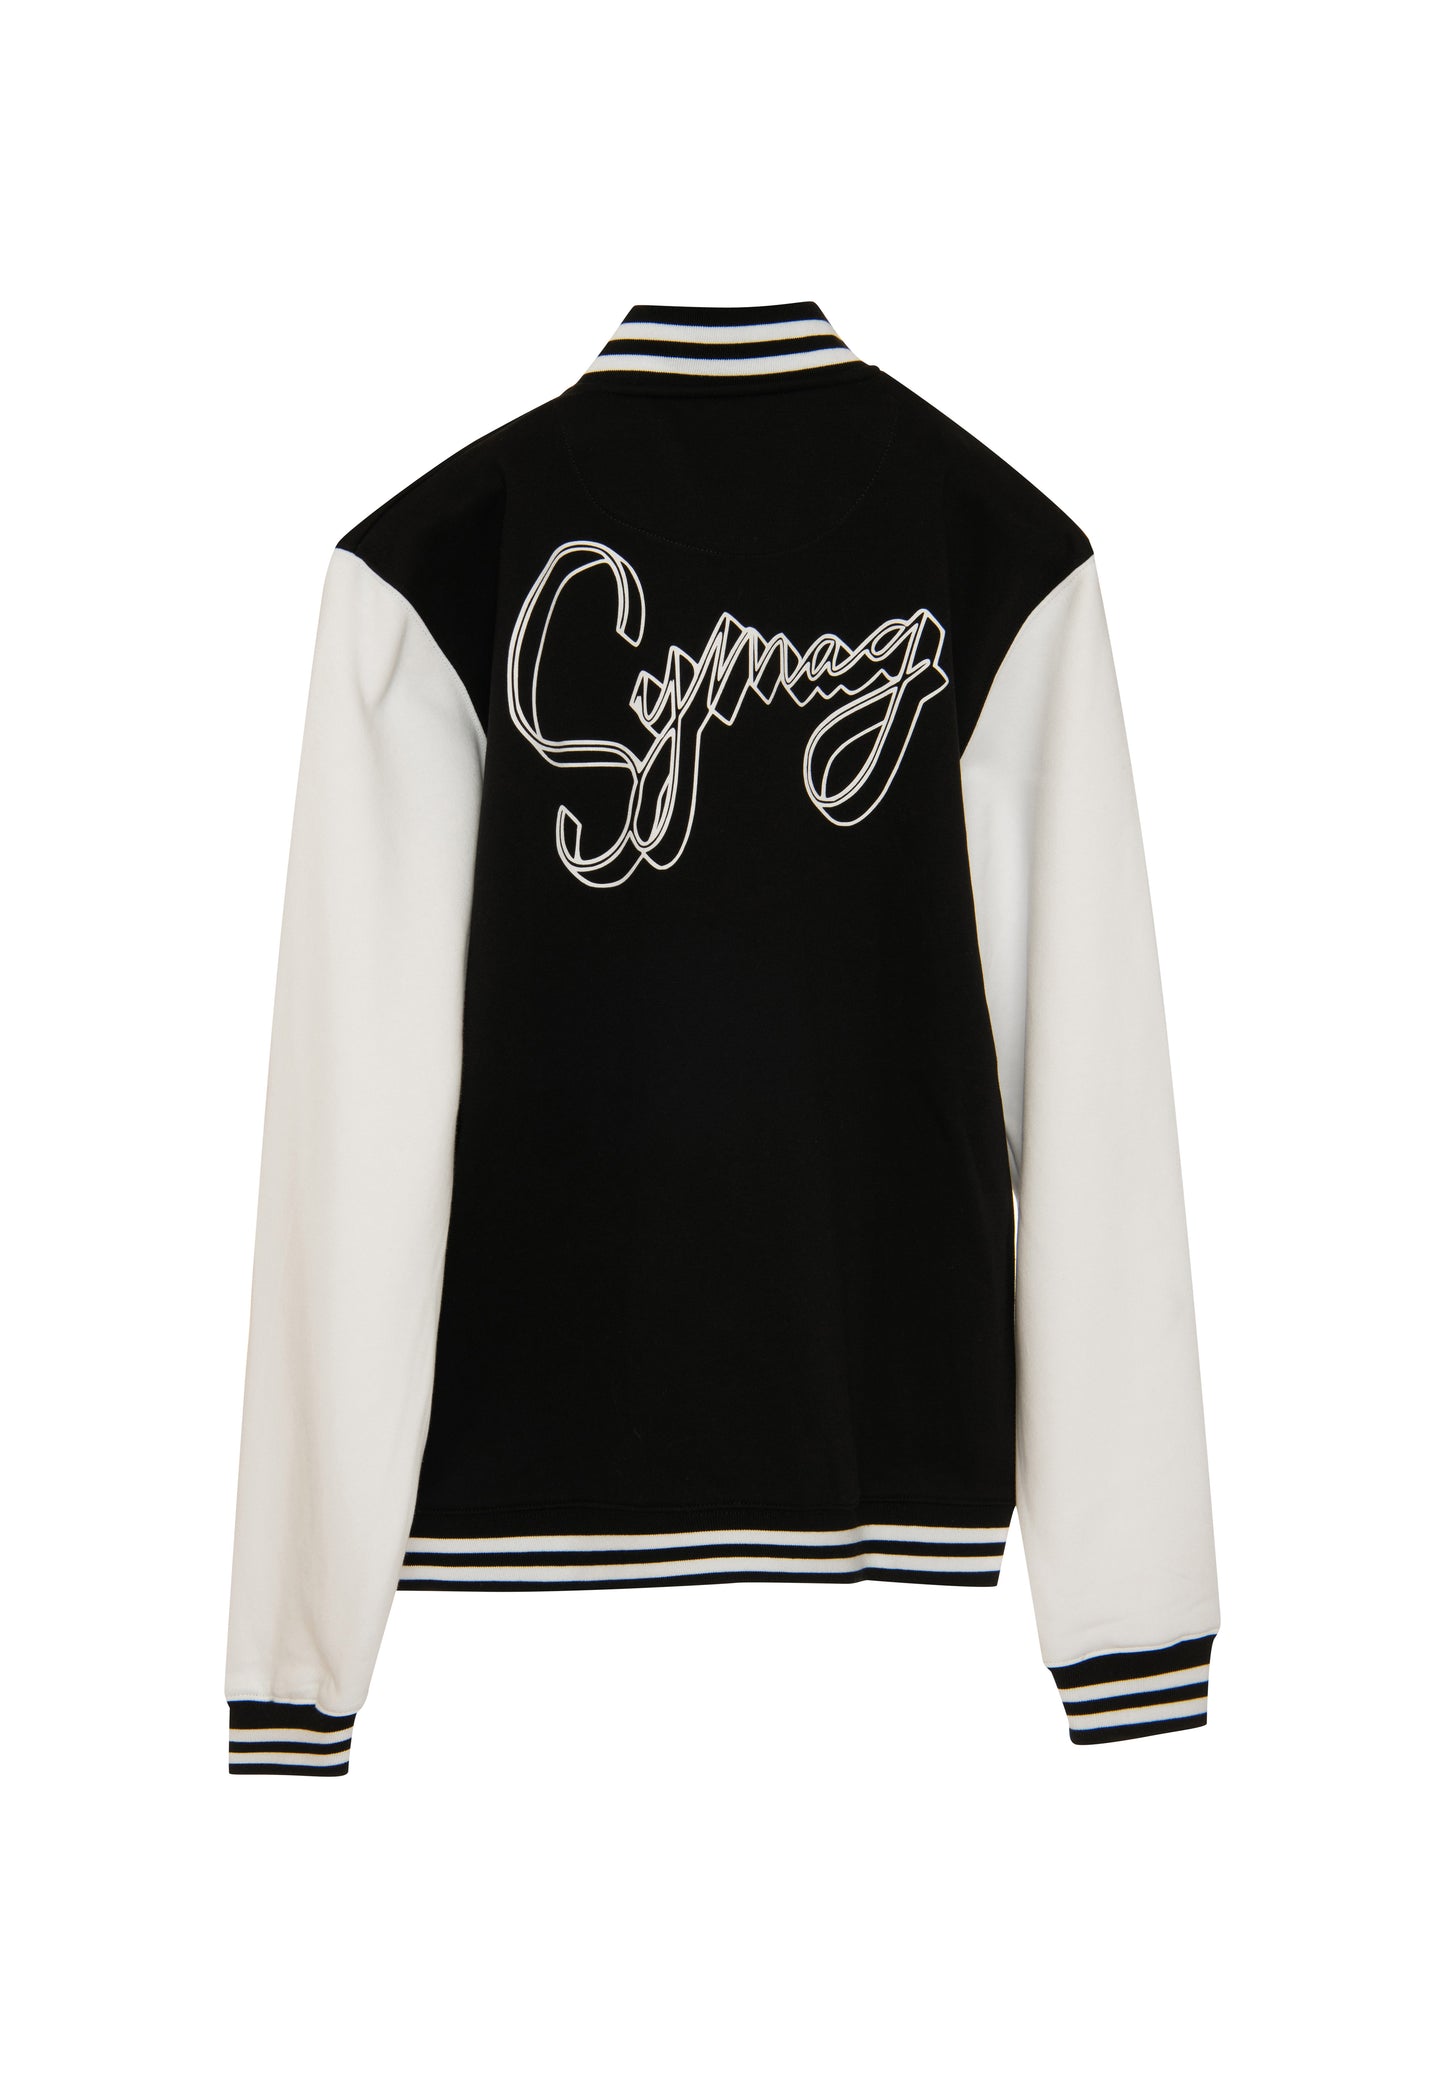 College Jacket - Symag on the back